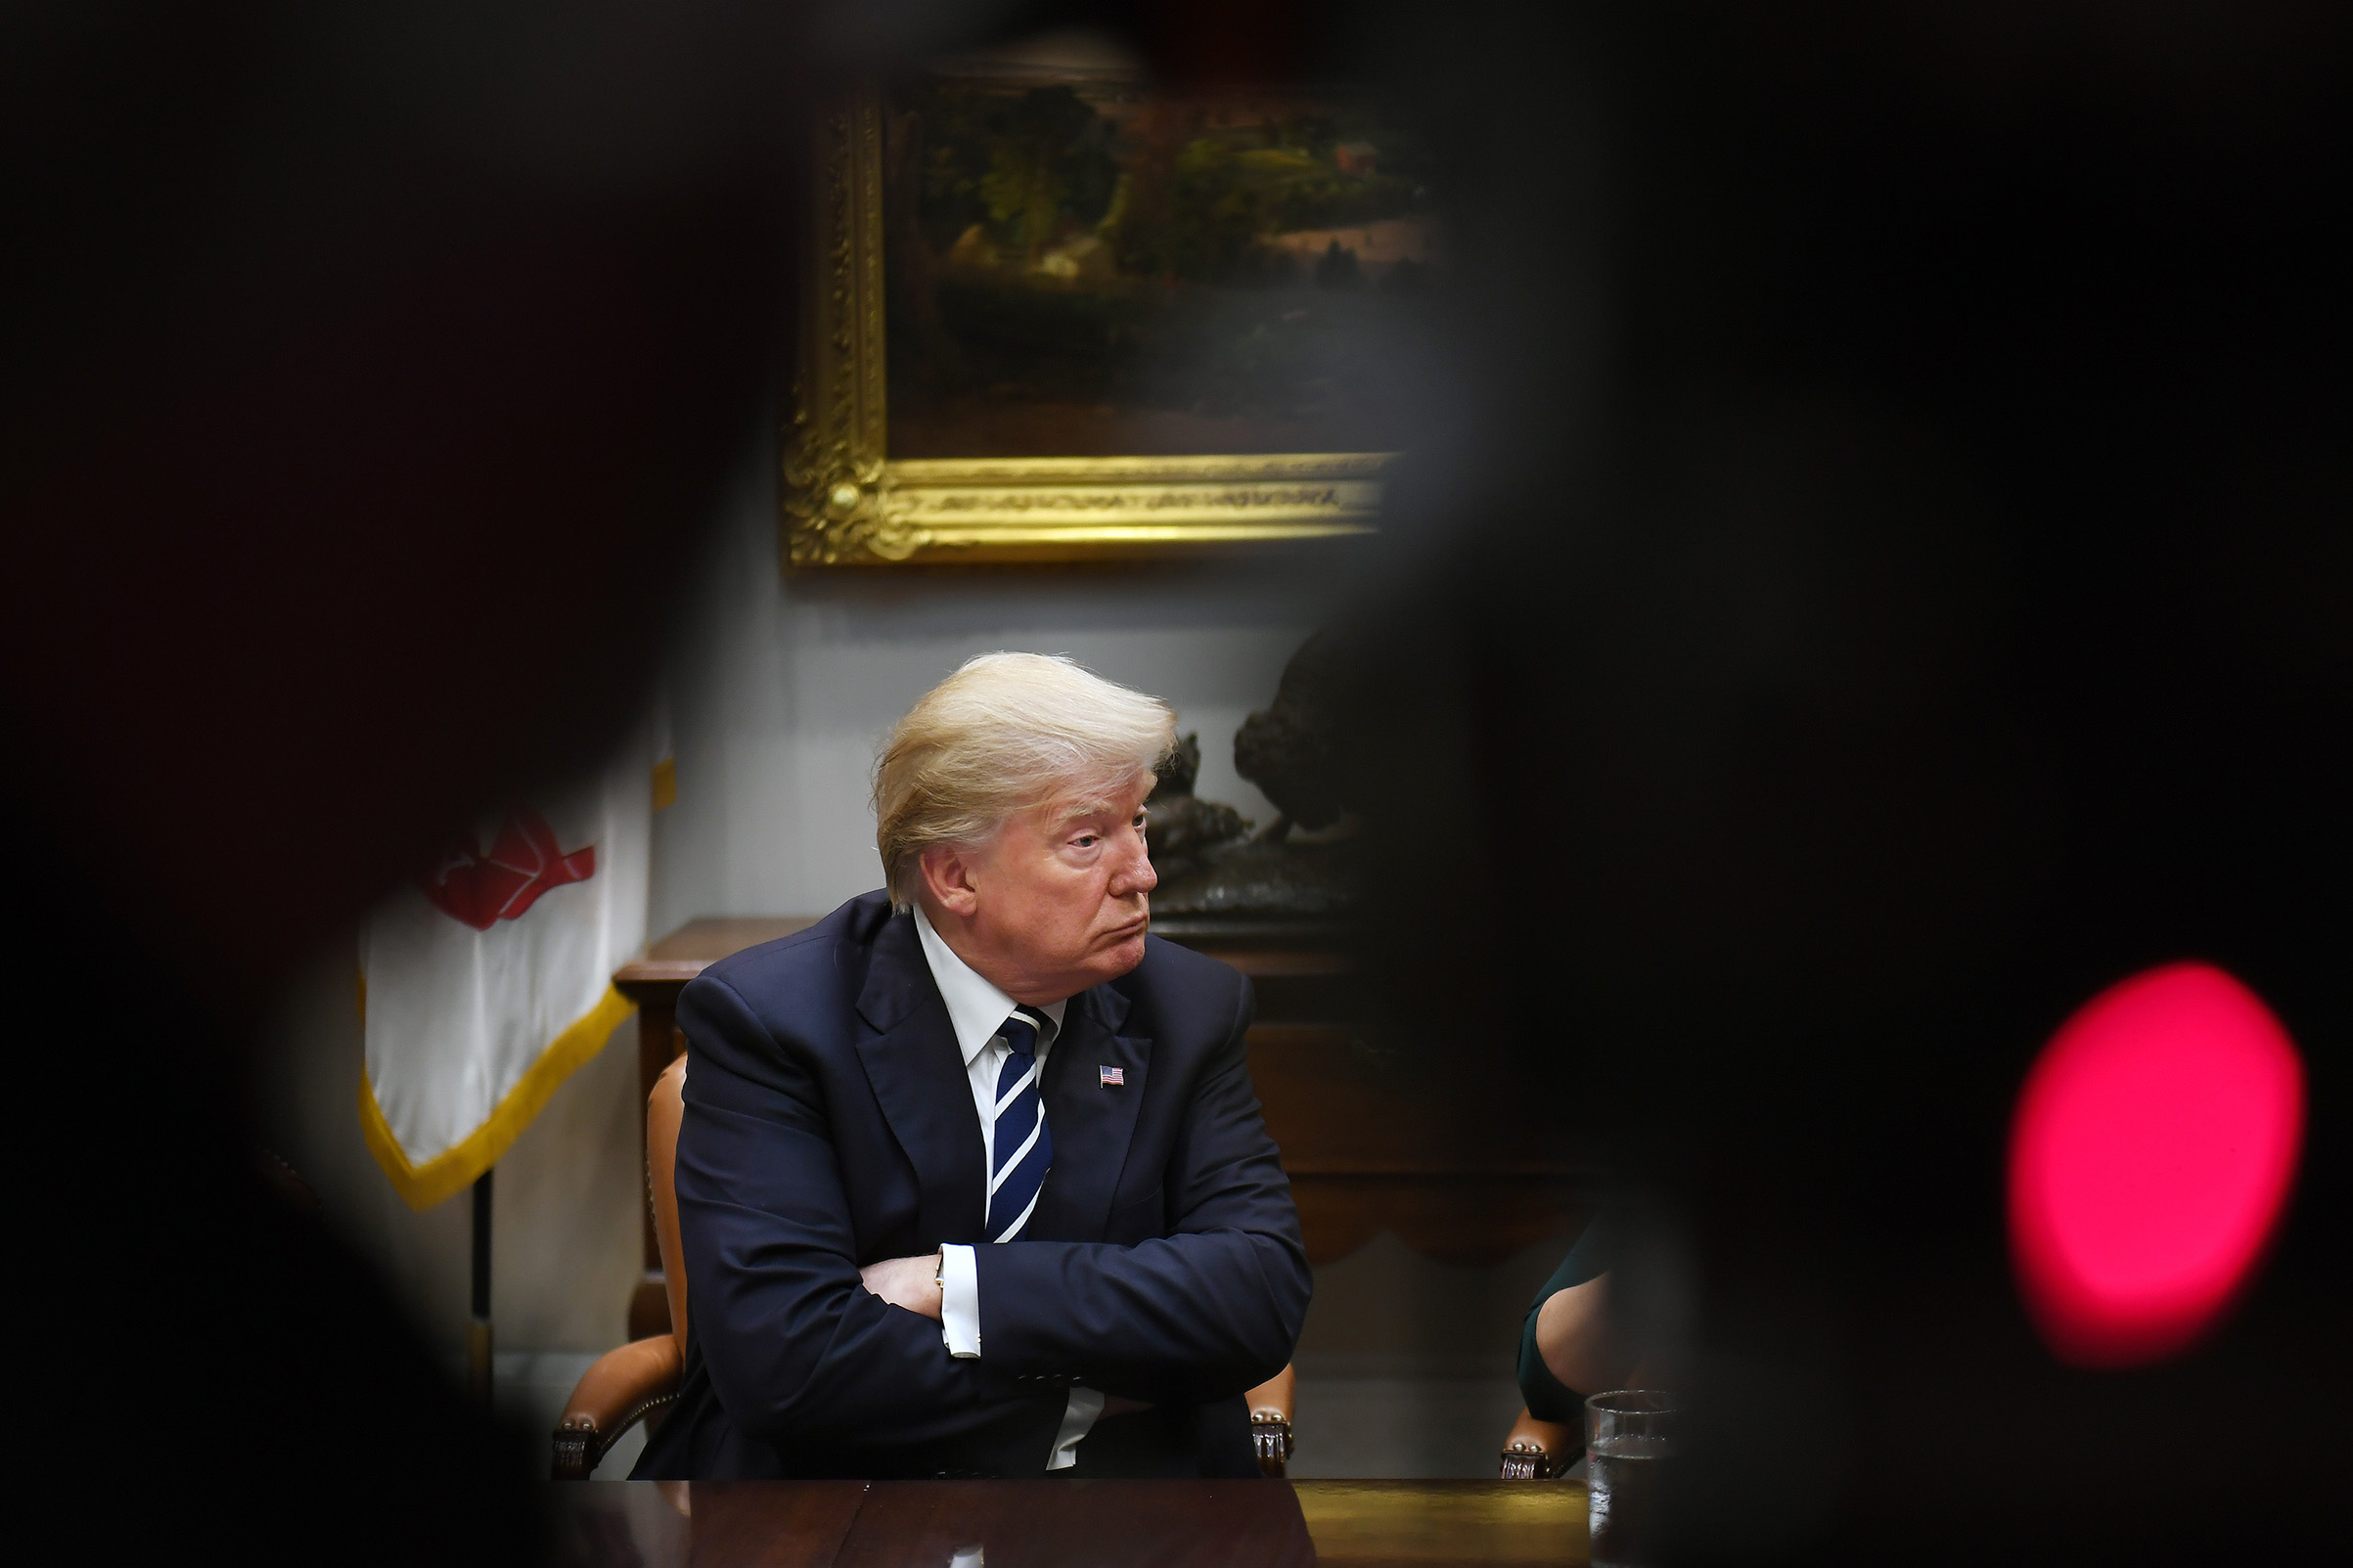 President Donald Trump attends a discussion on making changes to the prison system on Jan. 11, 2018 in Washington. (Matt McClain—The Washington Post/Getty Images)